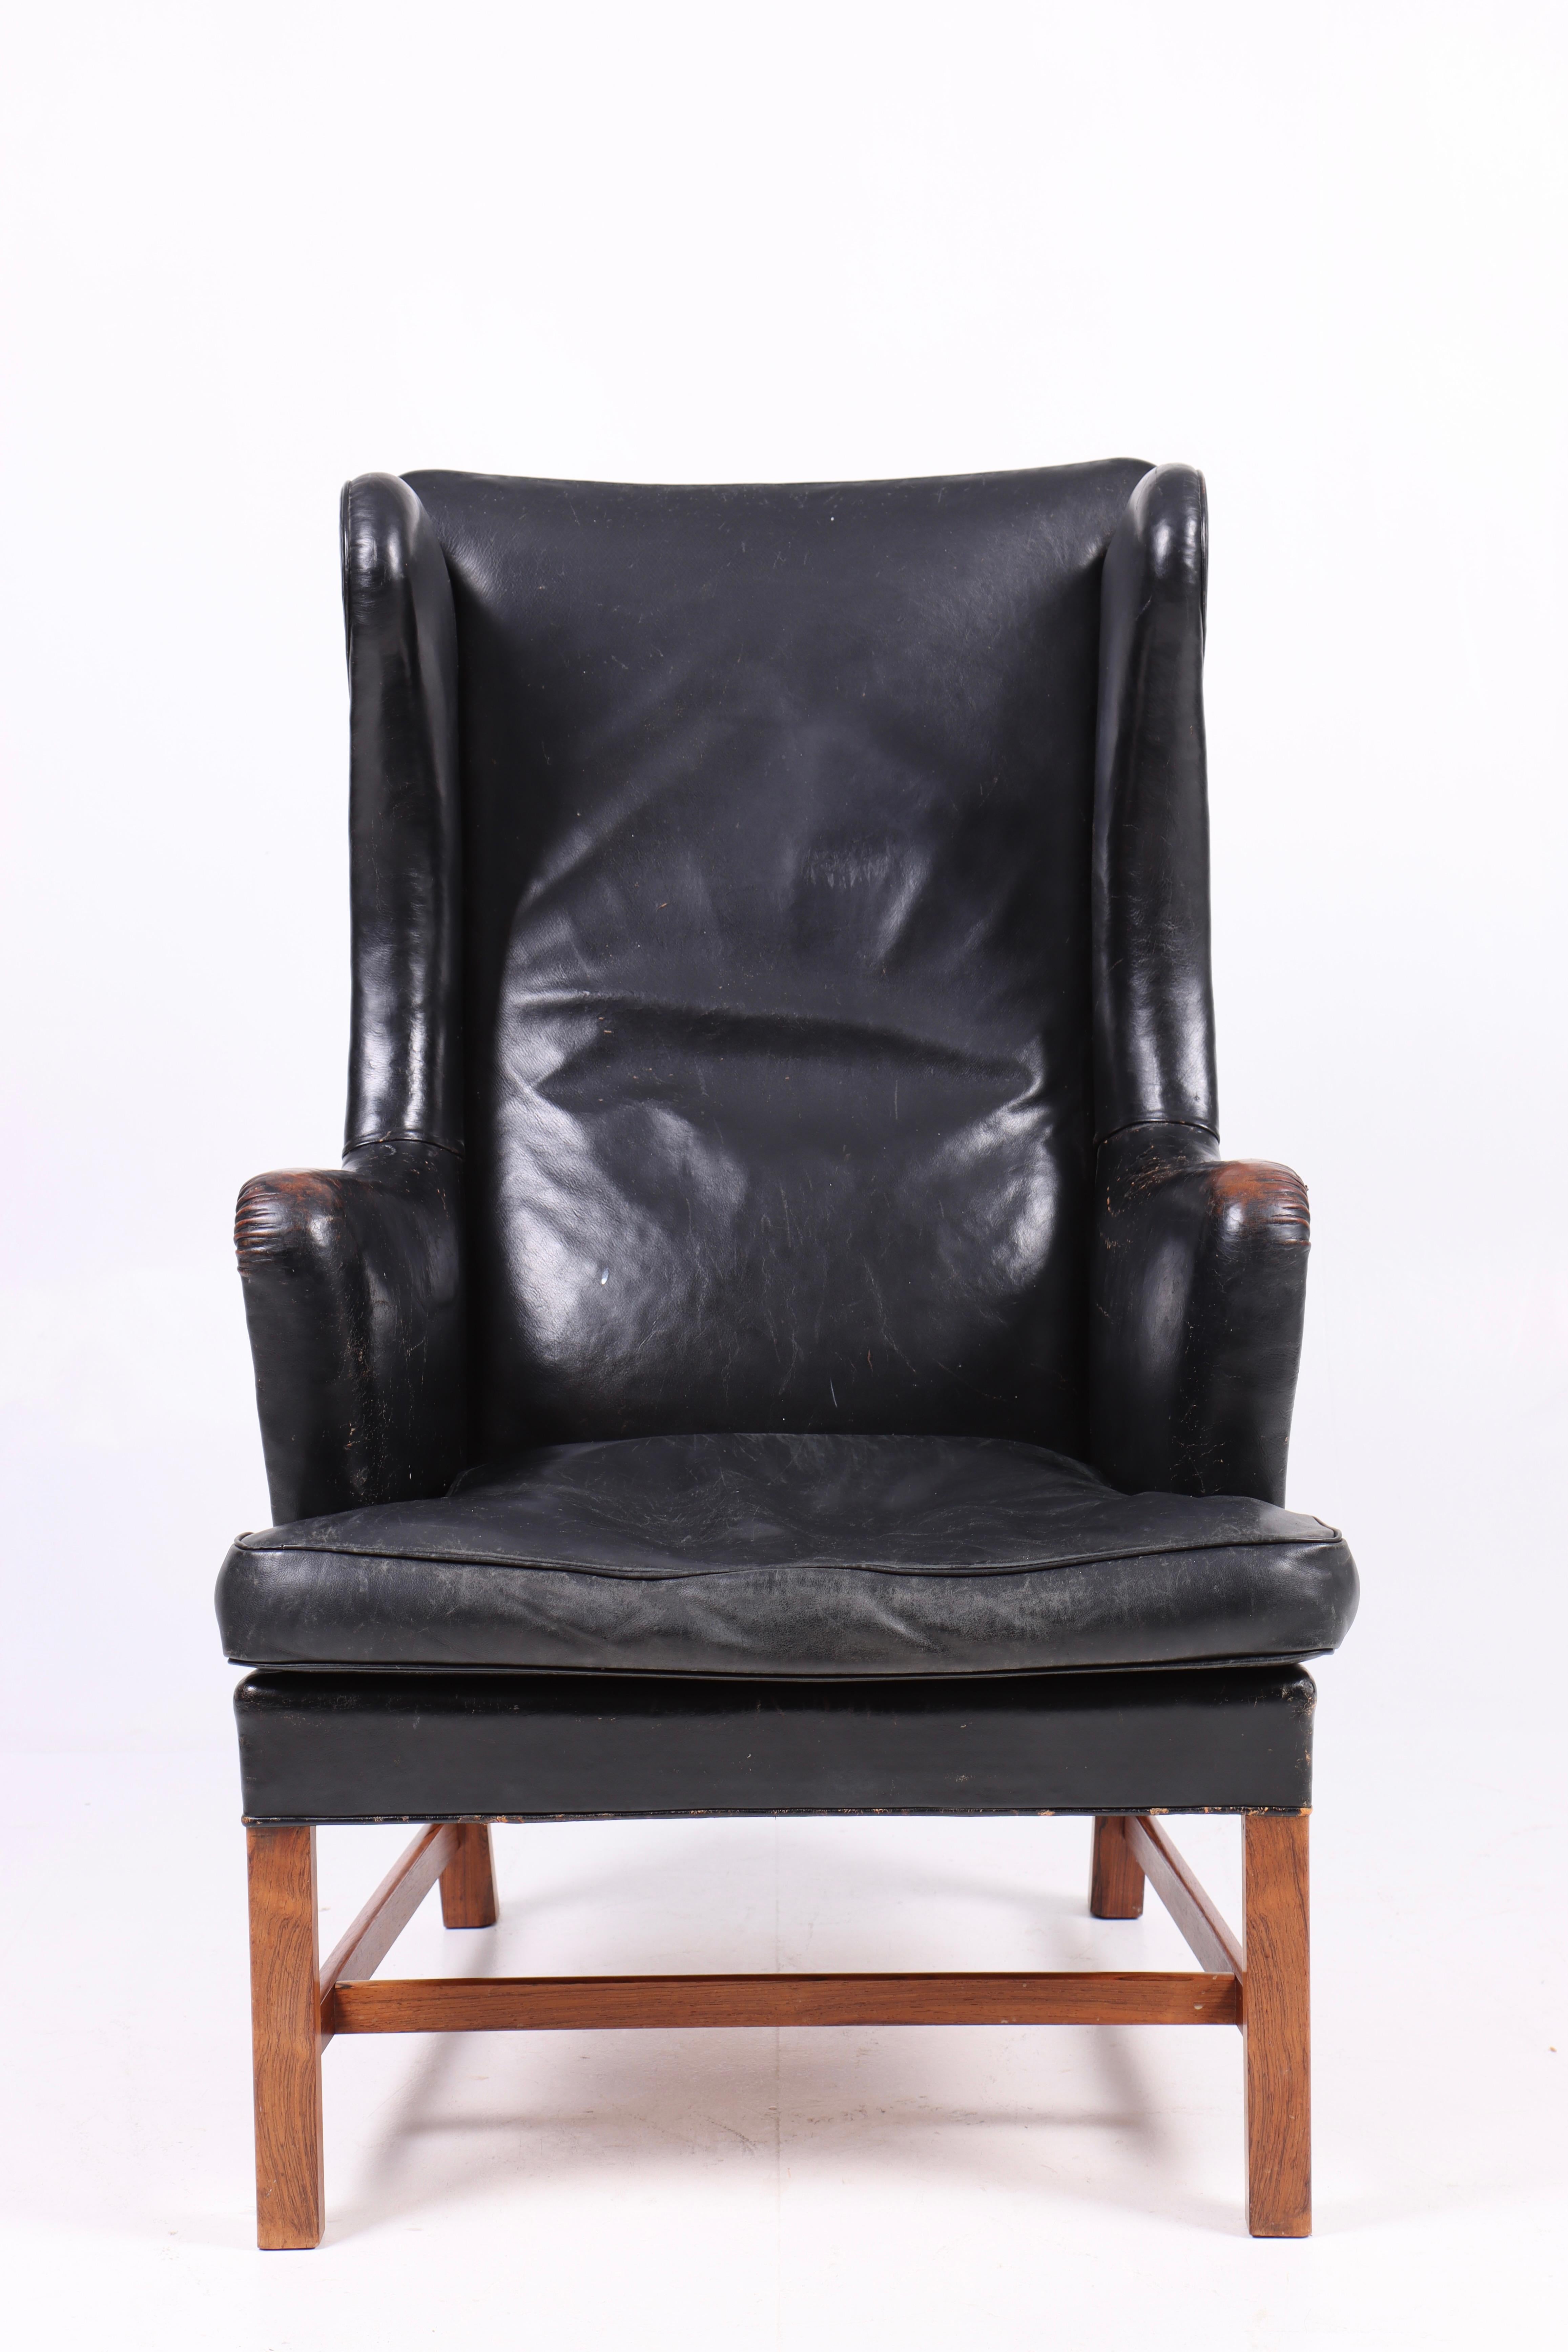 Great looking wingback chair in patinated black leather, designed by Kaare Klint for Rud Rasmussen in 1946 model 5313. Made in Denmark. Original condition.